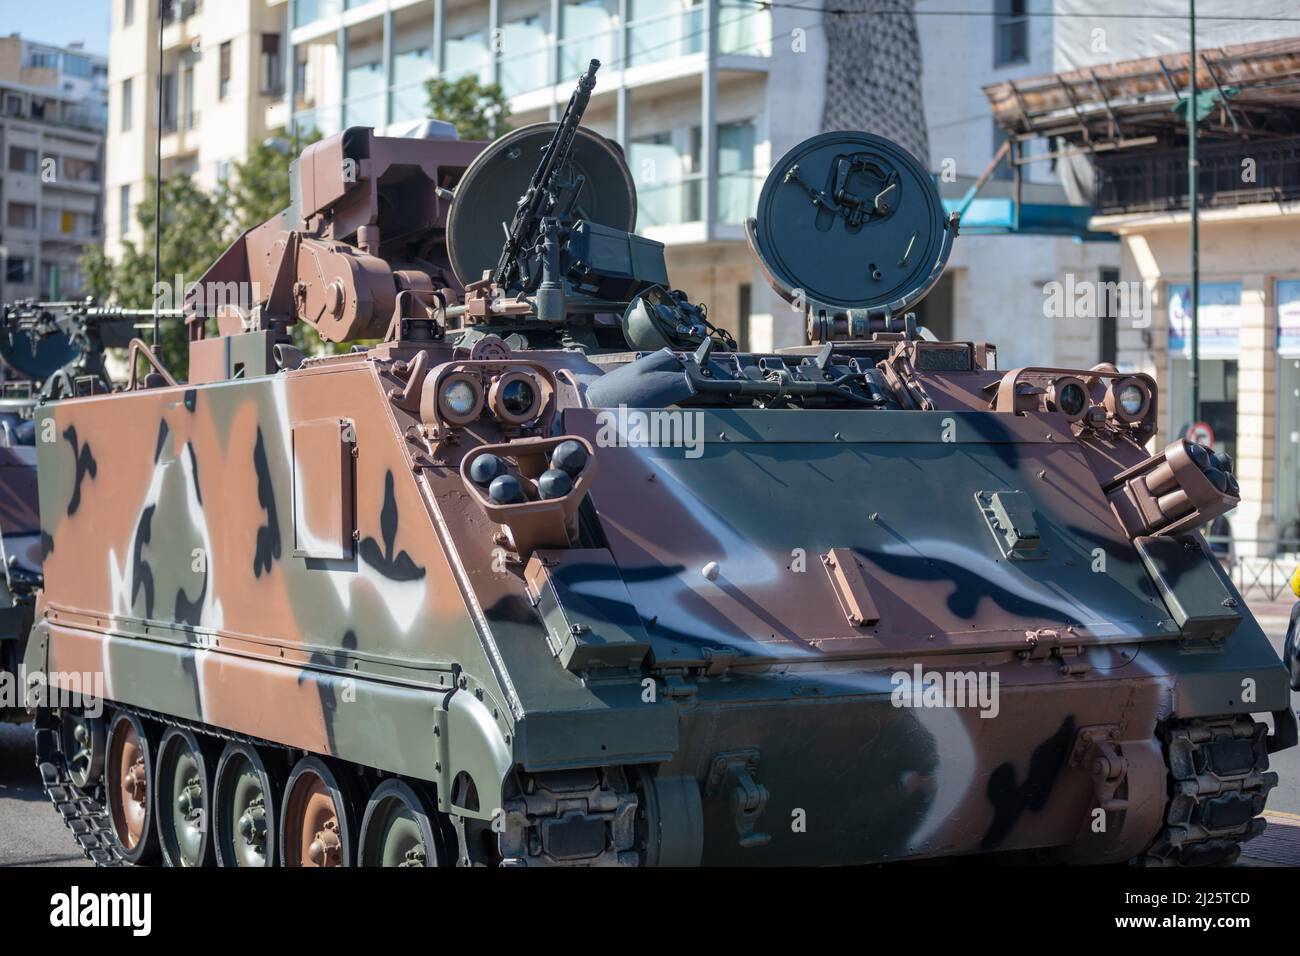 M113 armored personnel carrier APC, Military parade. War weapon, camouflage color tracked vehicle, close up view. Army machine for fight and defense Stock Photo